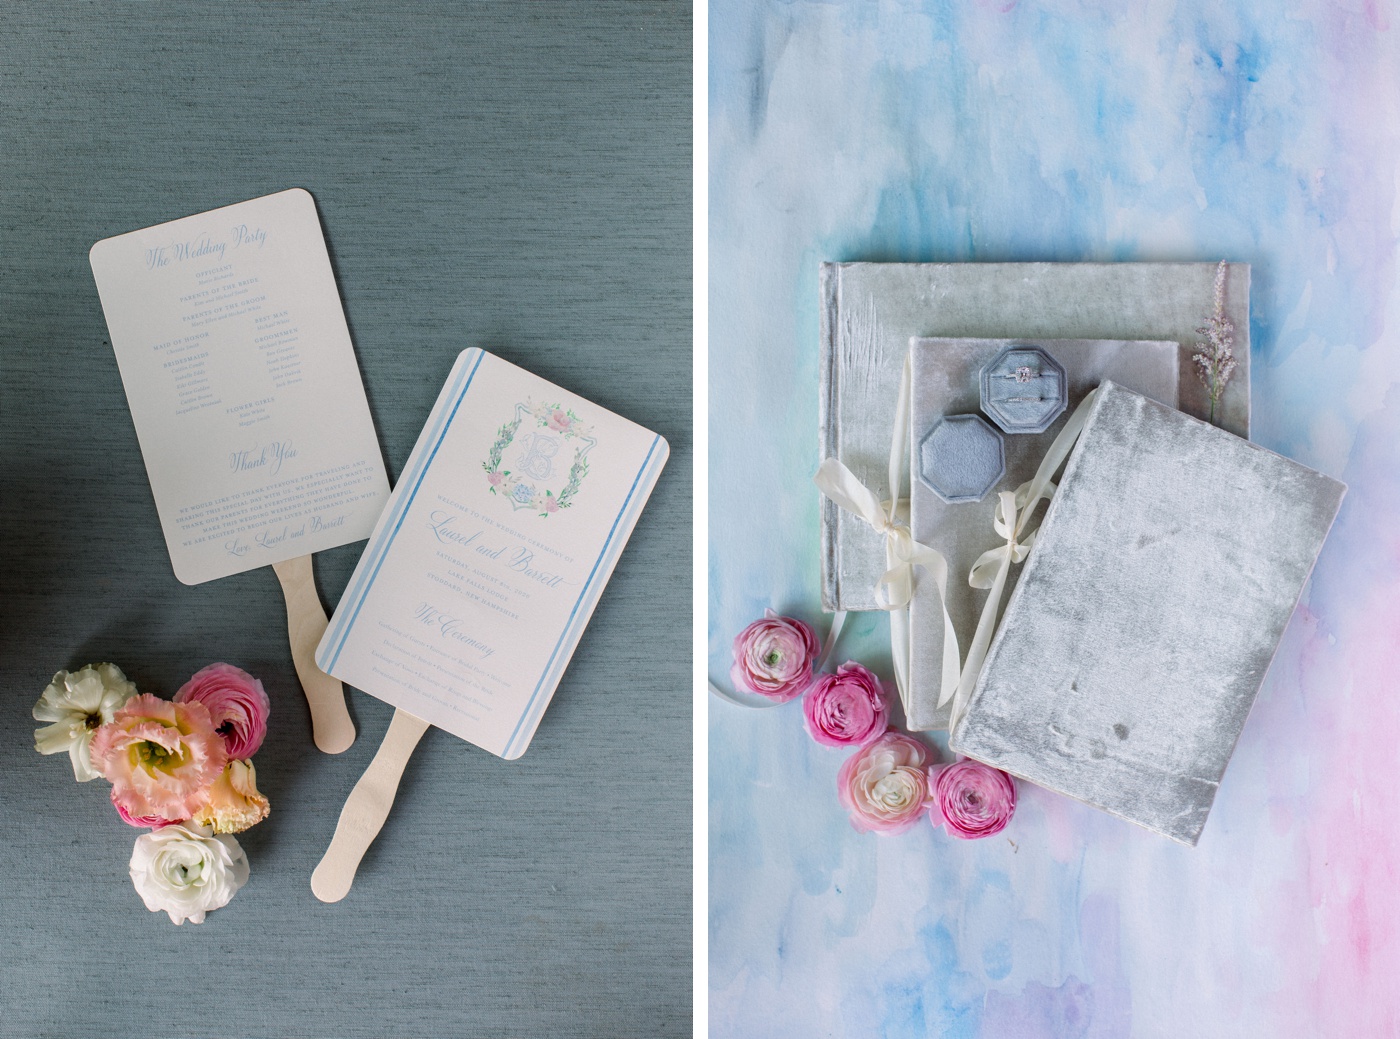 Styled shoot with blue and white details